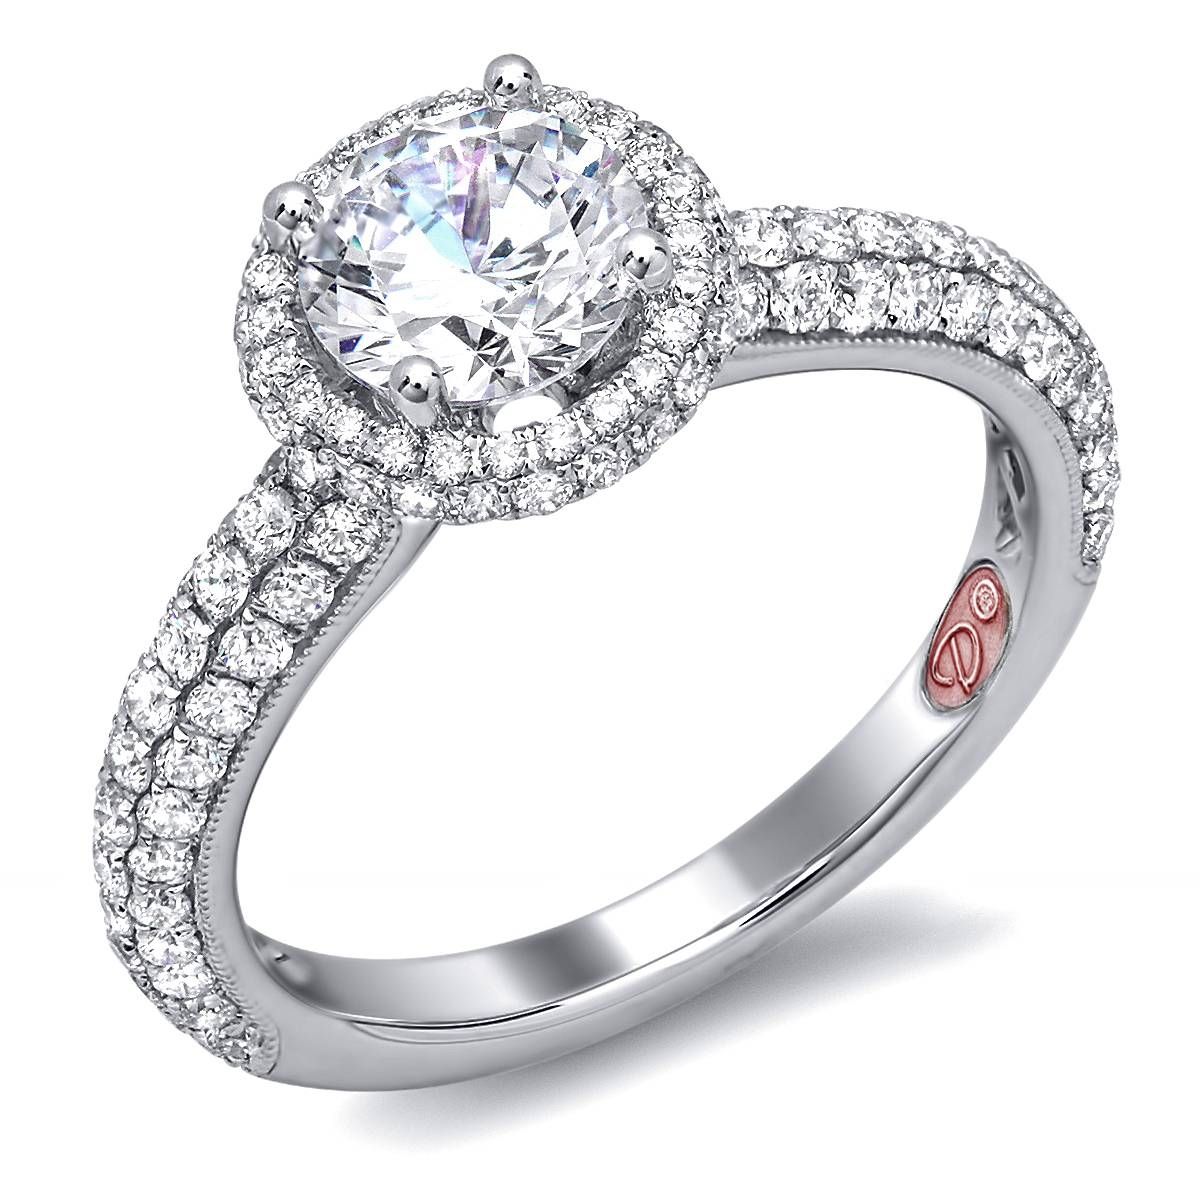 Round | Demarco Bridal Jewelry Official Blog For Wedding Rings With Diamonds All Around (View 1 of 15)